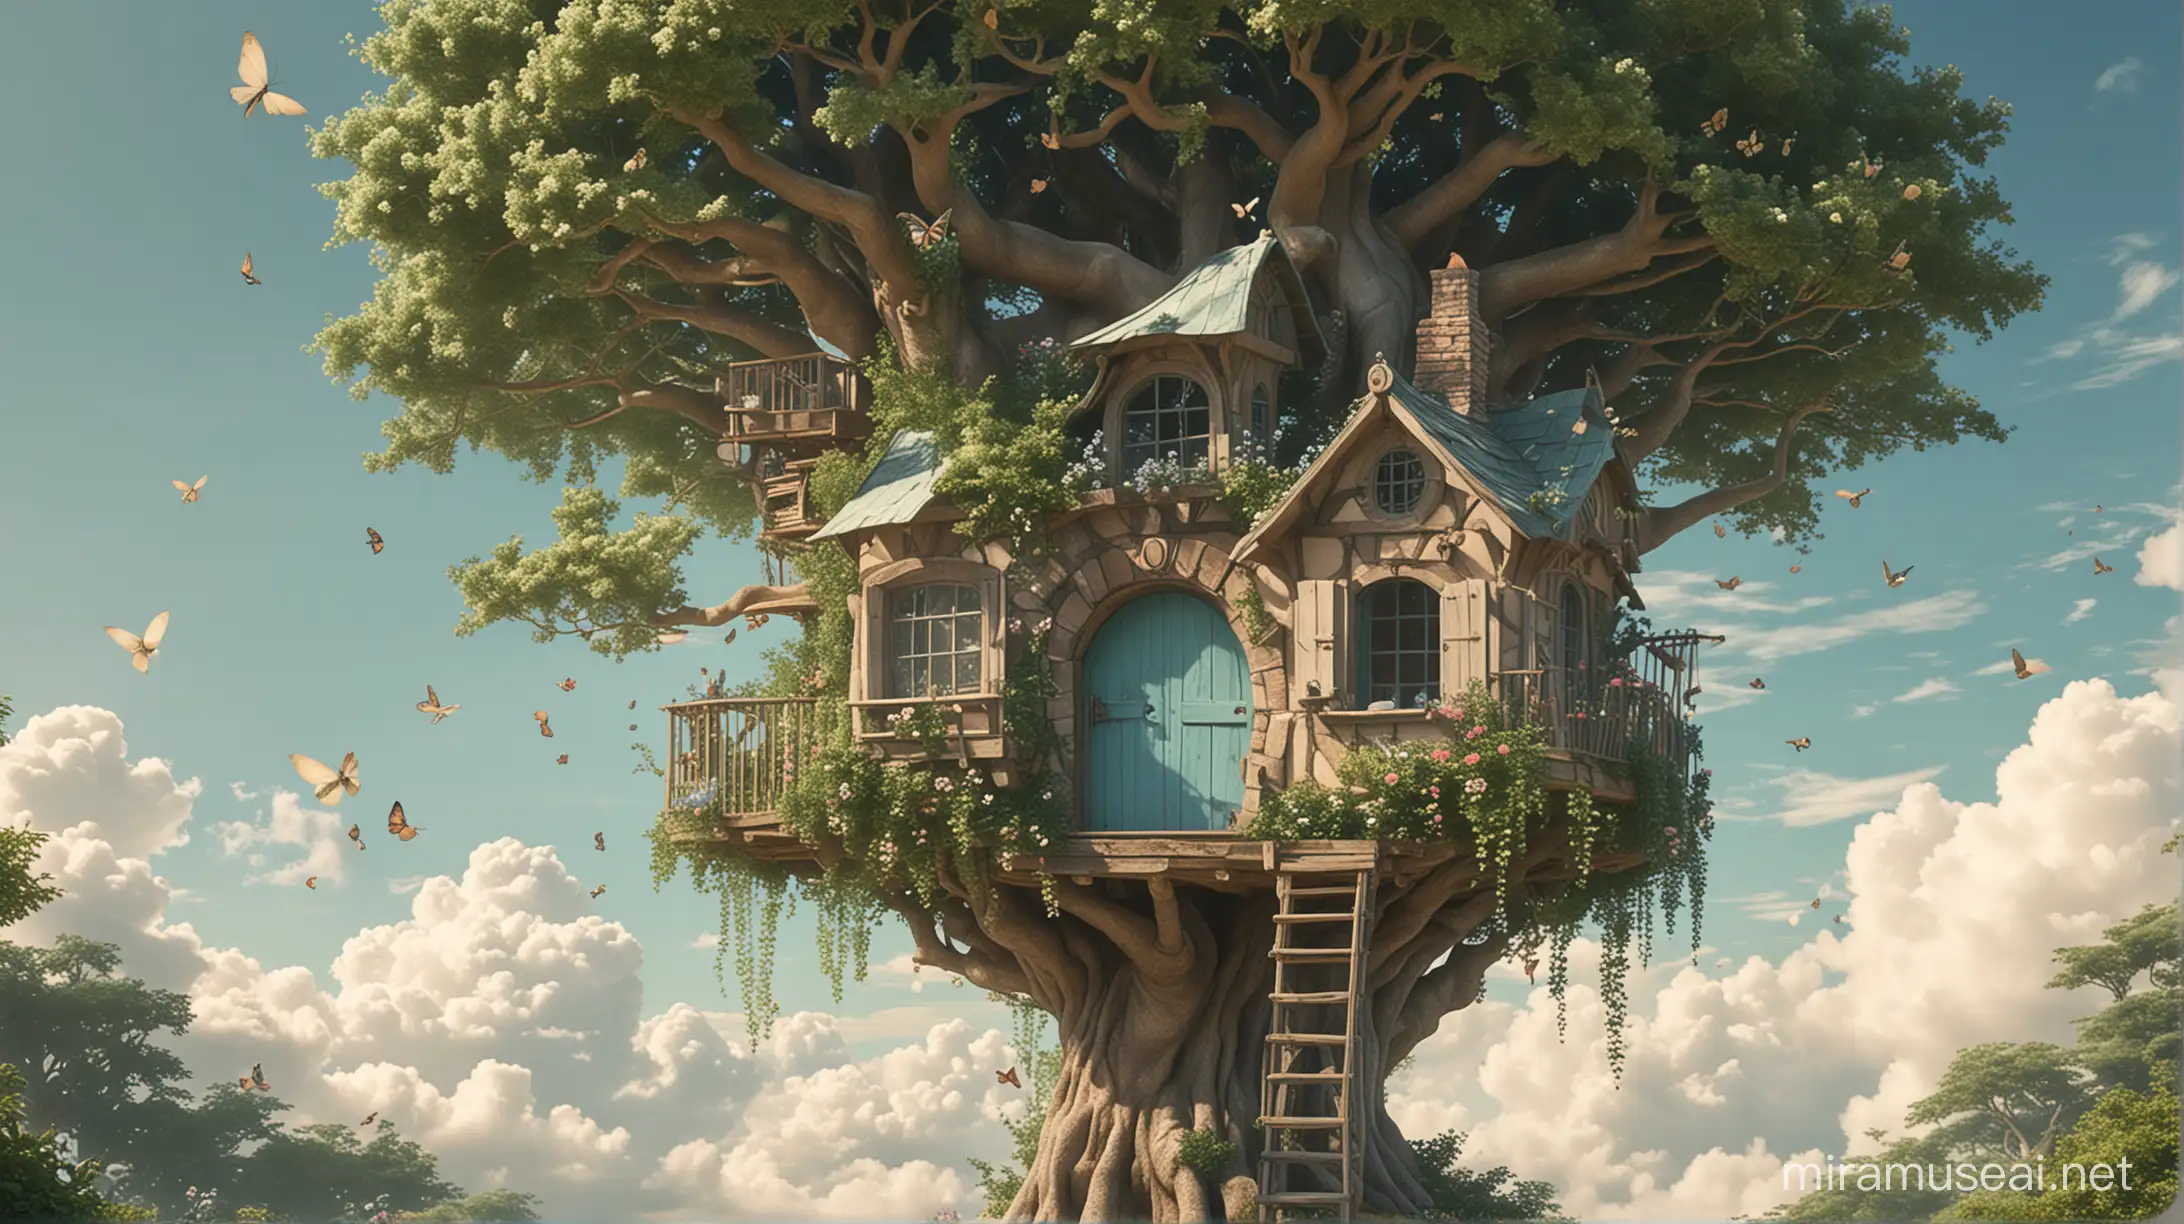 treehouse in the sky with circular door opening, airy and beautiful, lots of fluffy clouds in a blue sky, no branches above tree house, simple, pastel colors, one single circular portal opening, vintage feeling, early 2000s, some butterflies, girly, looks like a renaissance painting, feeling of switzerland, fairy land, moss on house, some small birds disney style, treehouse on the far right side of image, big cloud where i can write text, fantasy, foggy, 1960s house style, hippie, fun, playful